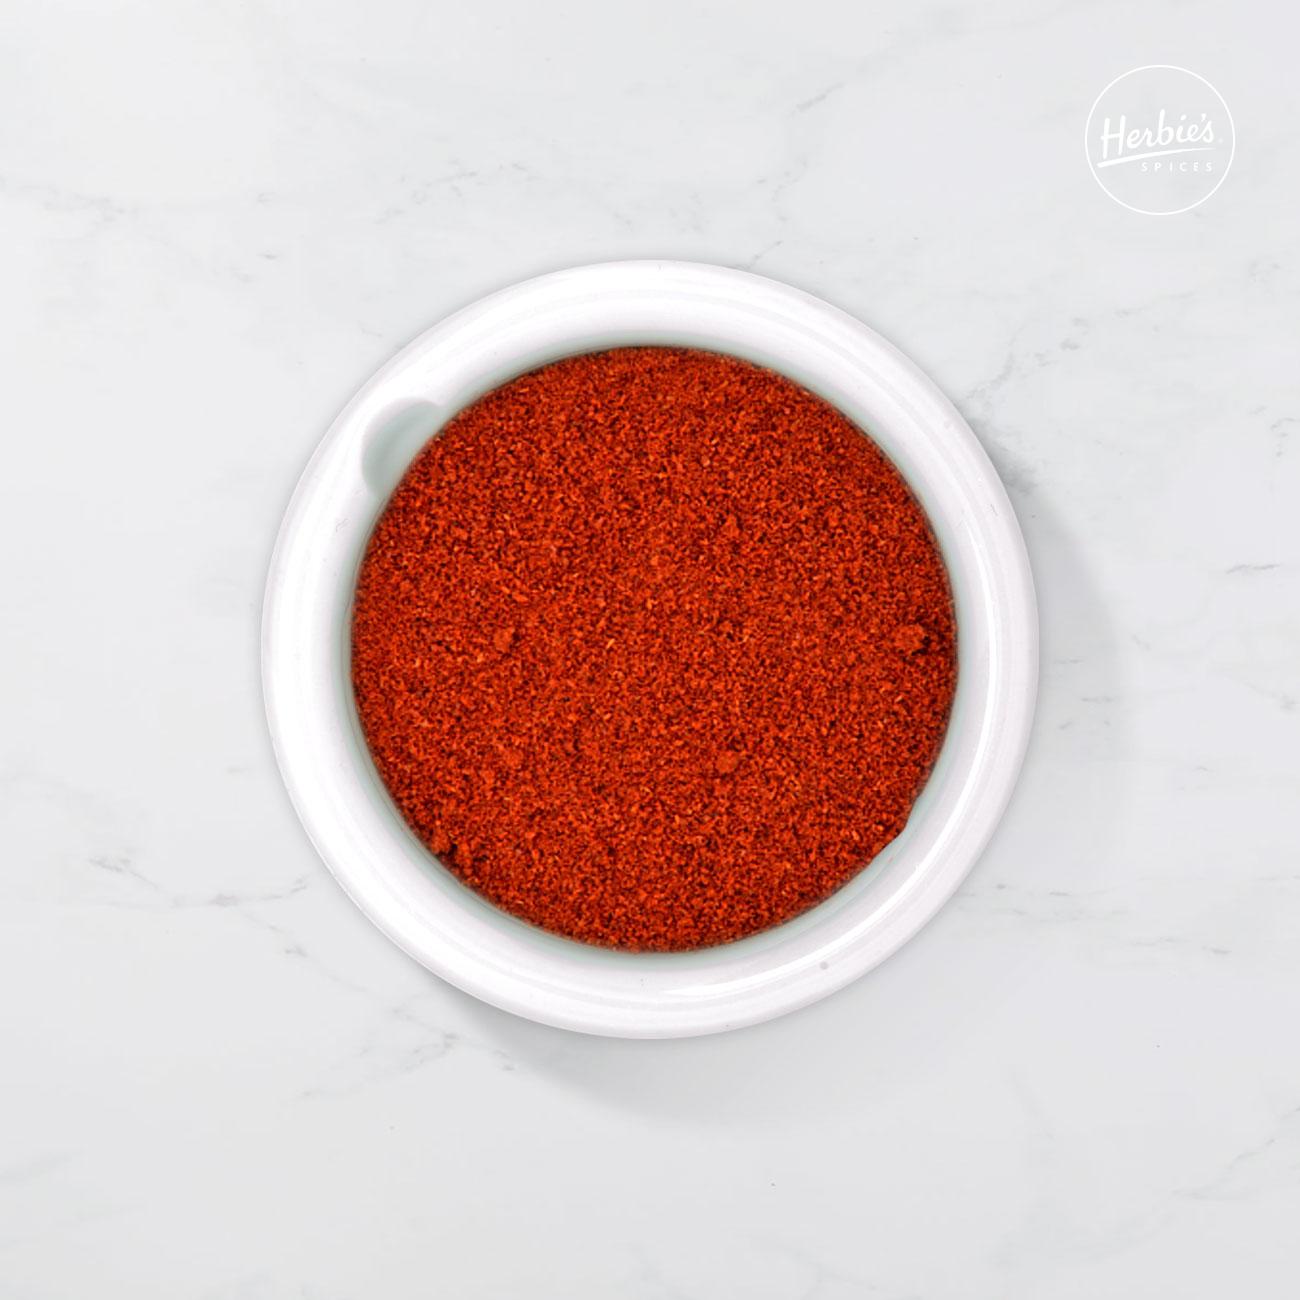 Paprika Hot Spice – Herbie's Spices